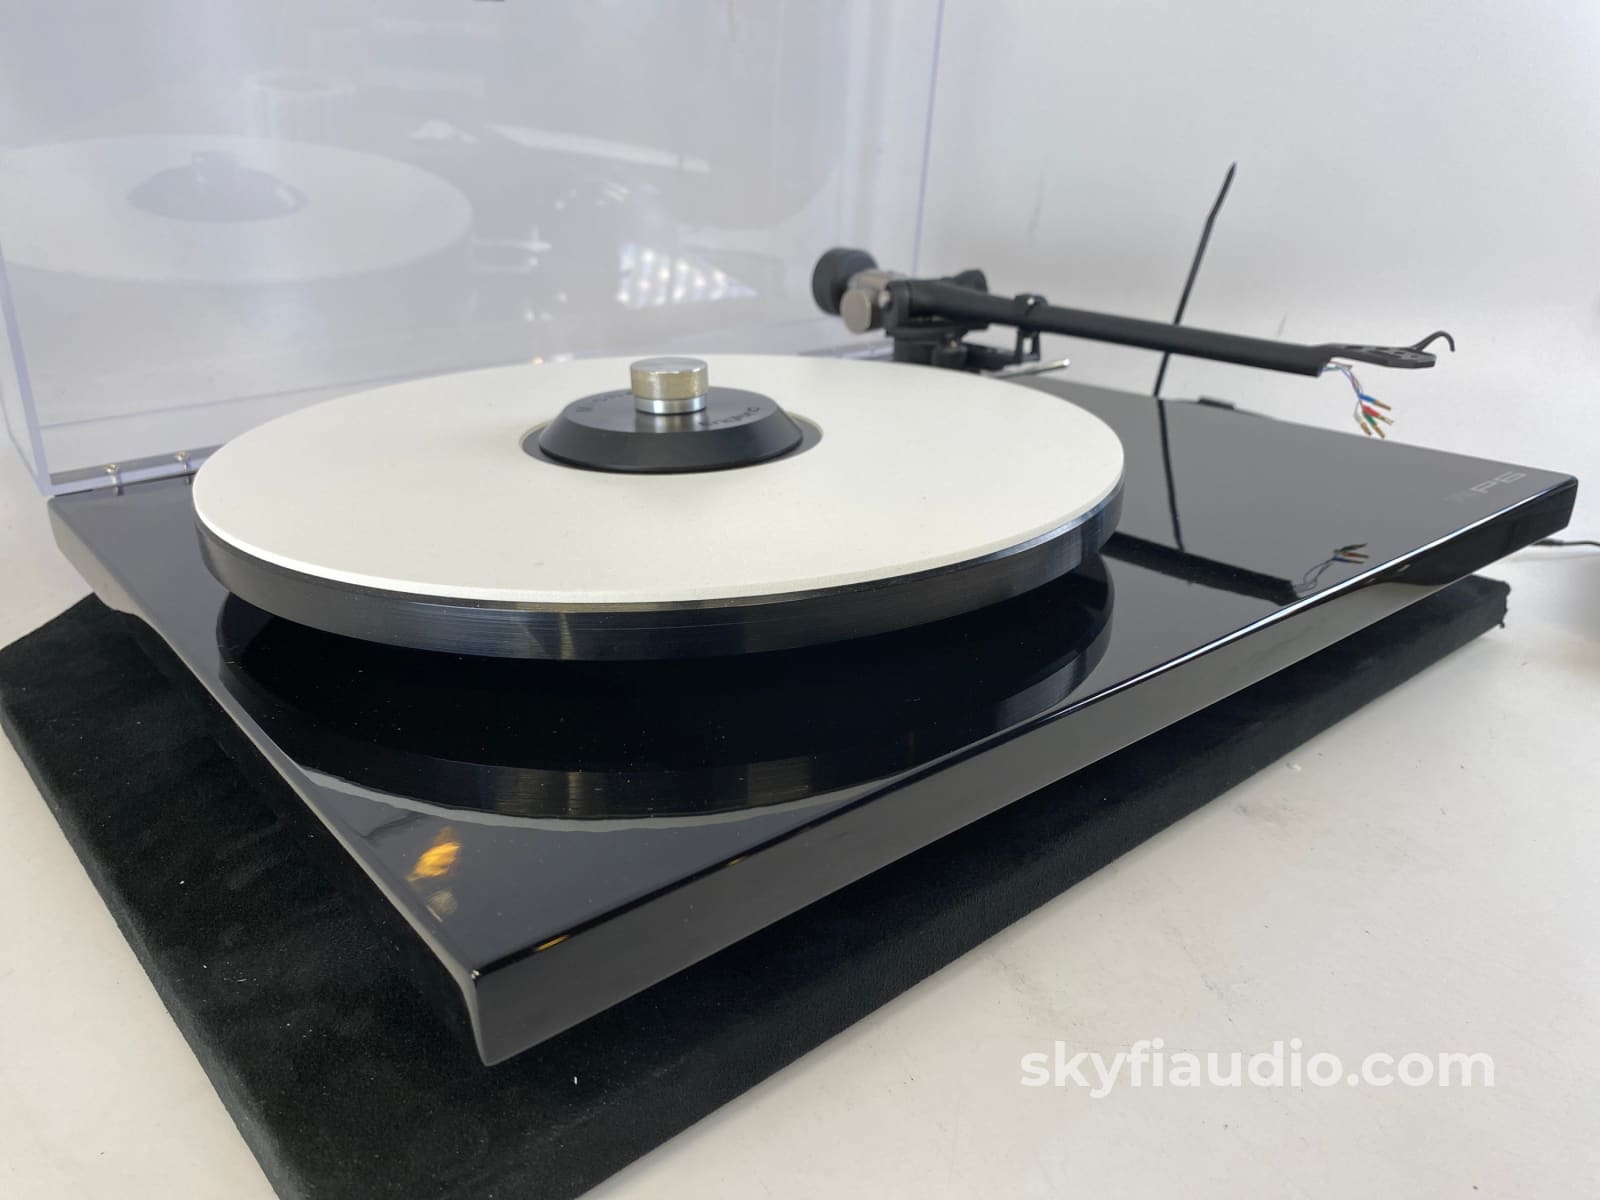 Rega Rp6 Turntable With Many Upgrades And New Sumiko Mc Cartridge